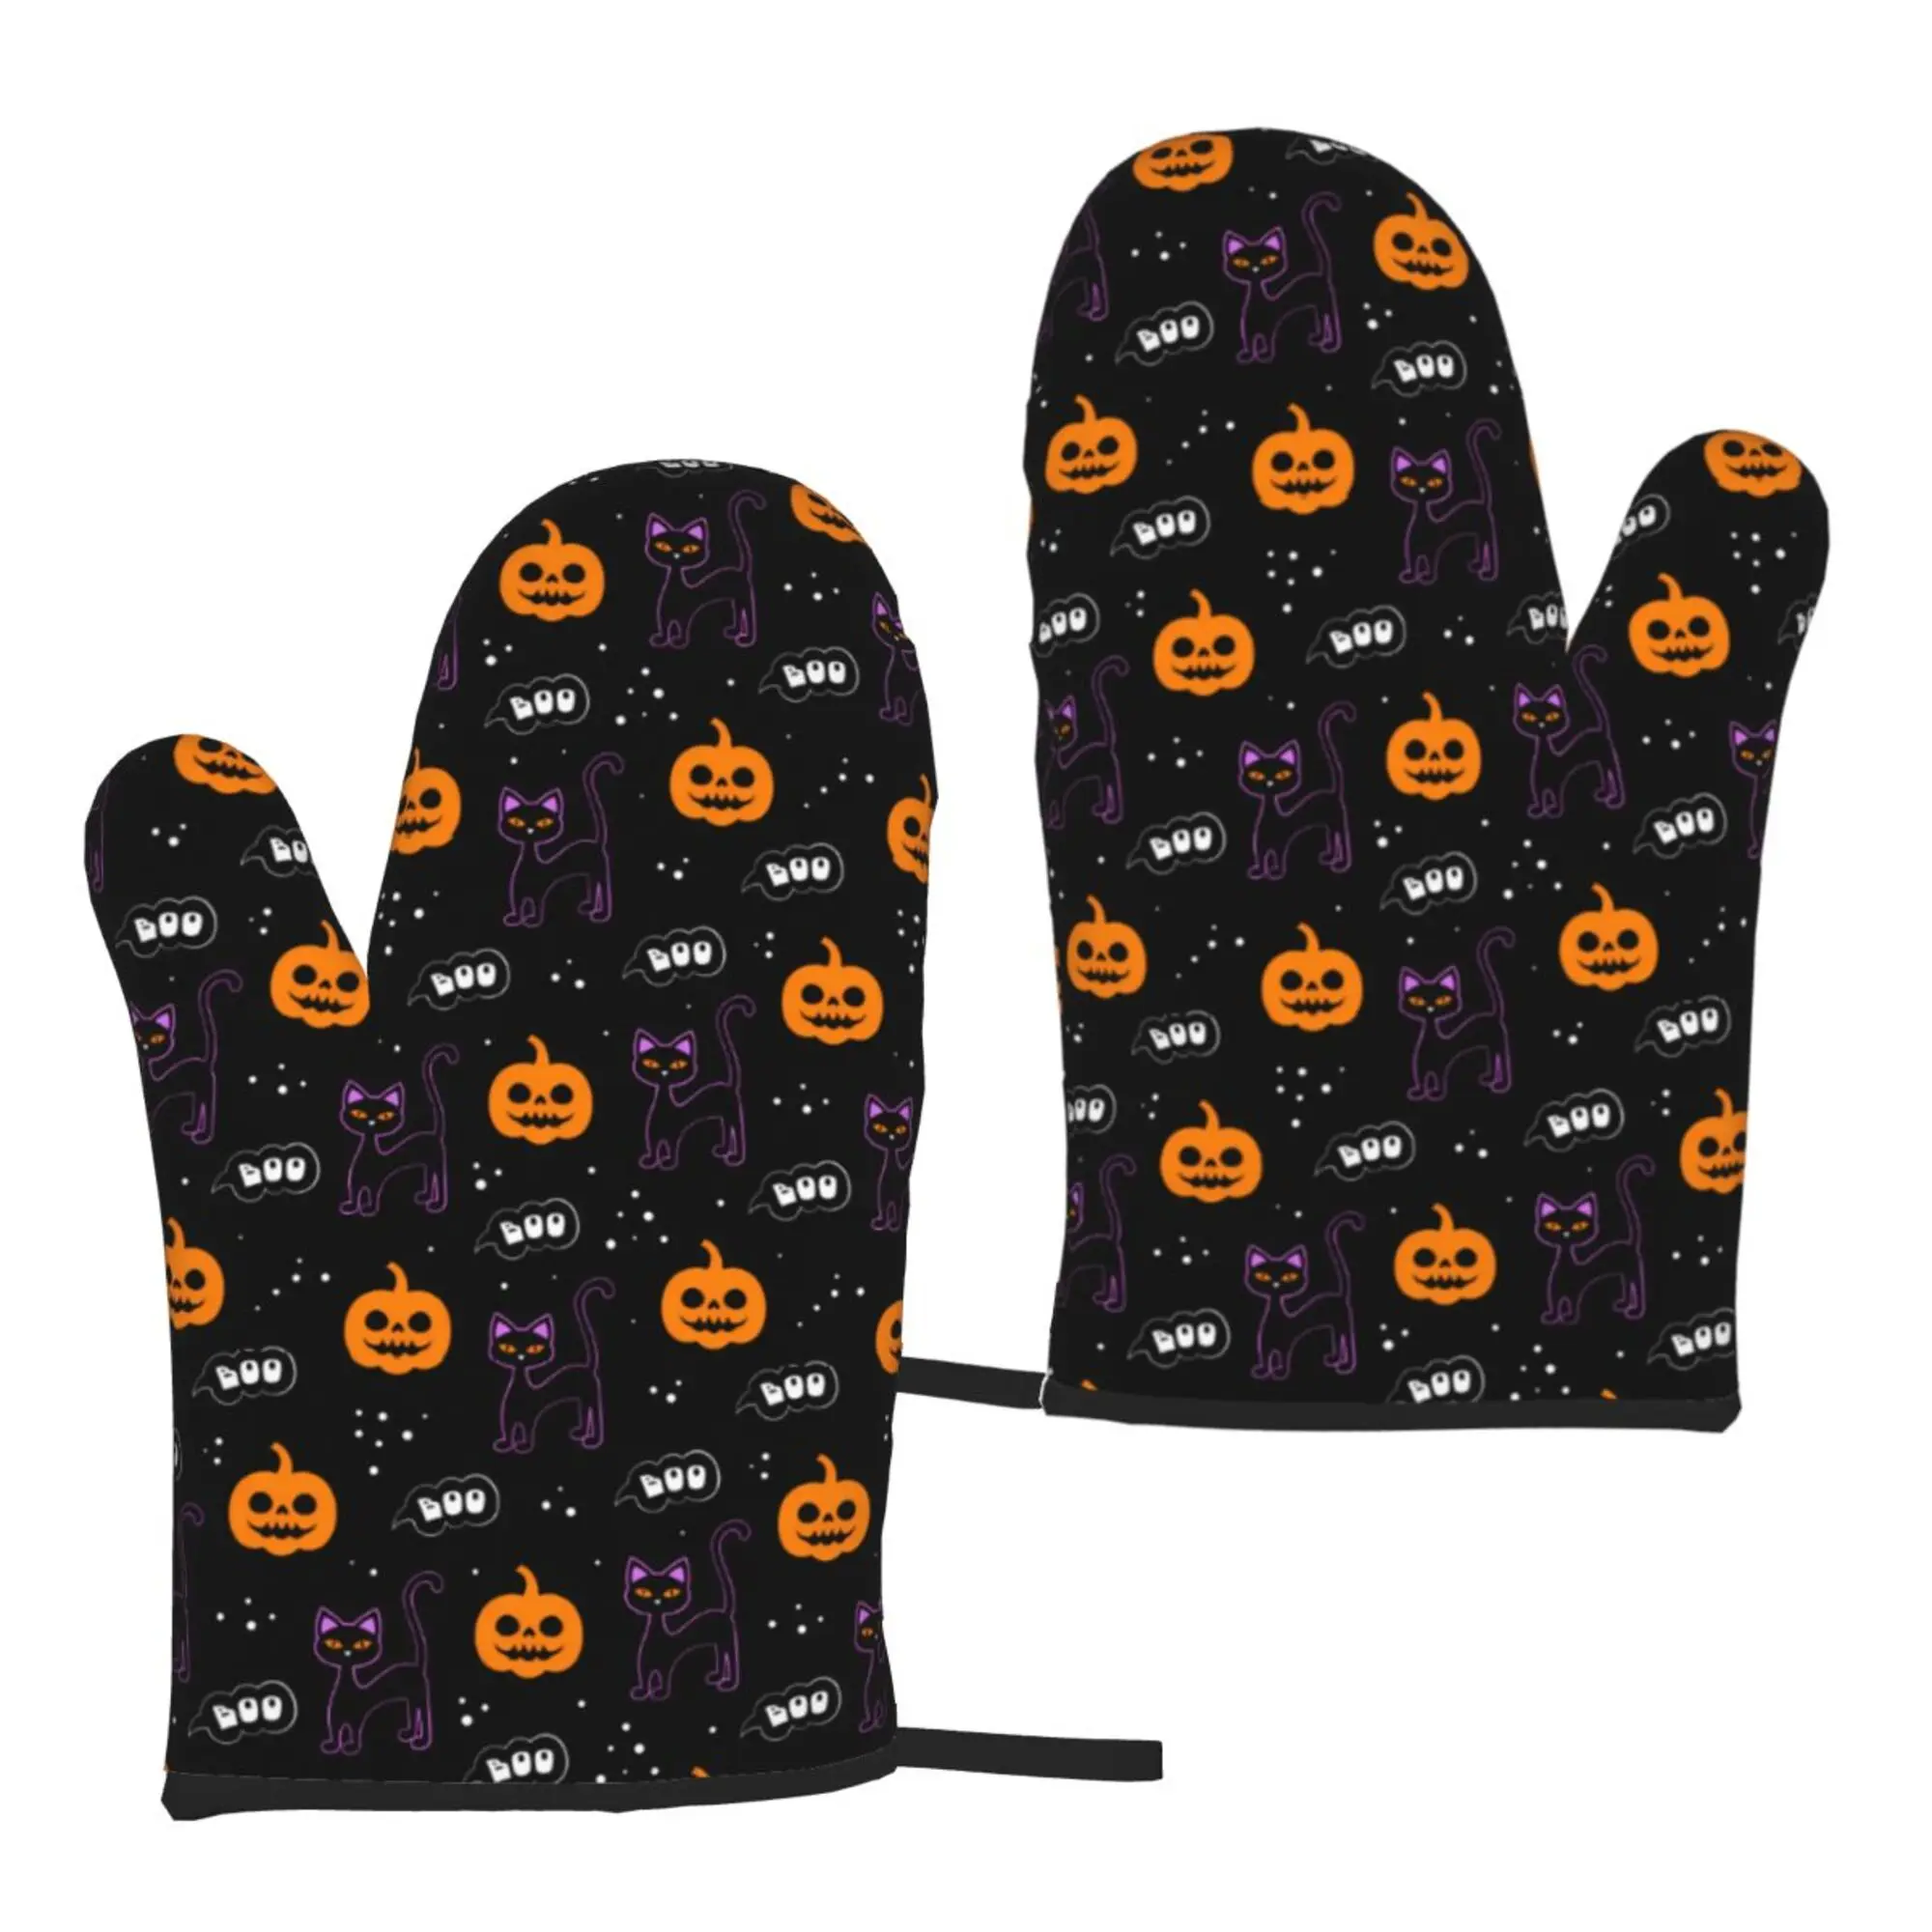 Black Cat Boo Pumpkin Halloween Oven Mitts 2pc Microwave Gloves Bbq Cooking Gloves Heat Resistant Kitchen Gloves One Size christmas cartoon solider oven mitts microwave gloves kitchen gloves heat resistant for kitchen cooking baking grilling bbq 2pcs